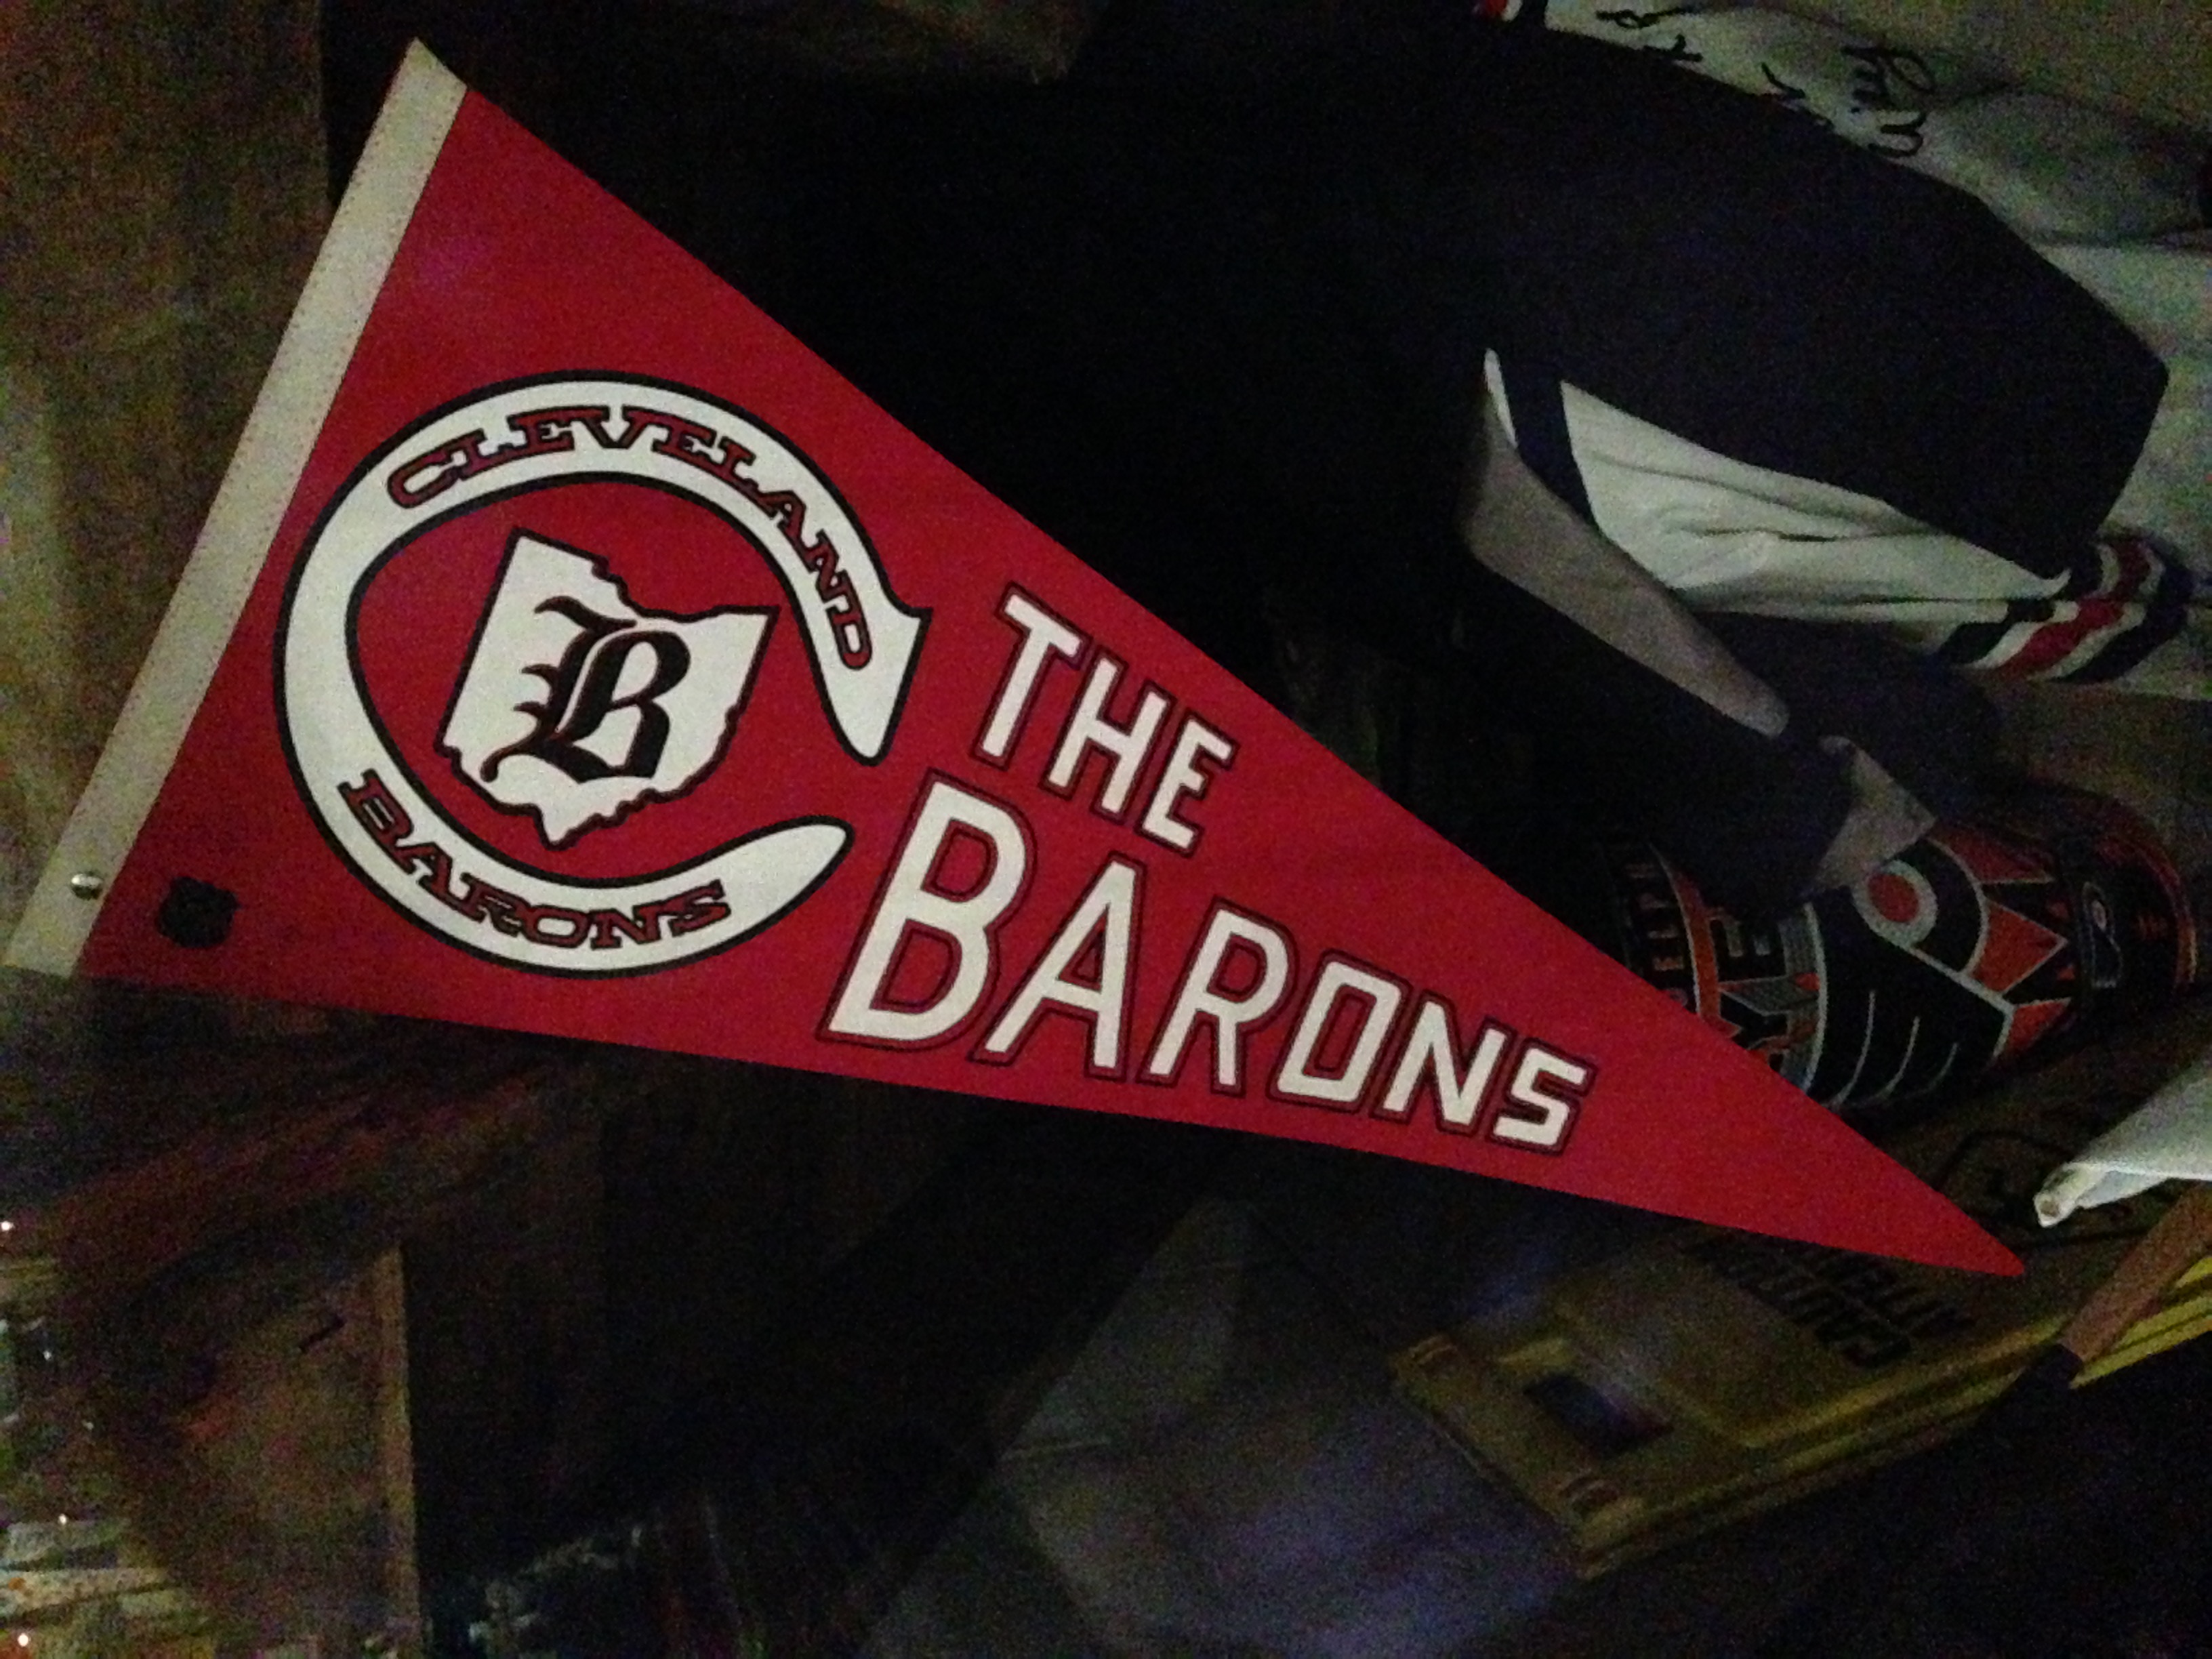 Cleveland Barons pennant